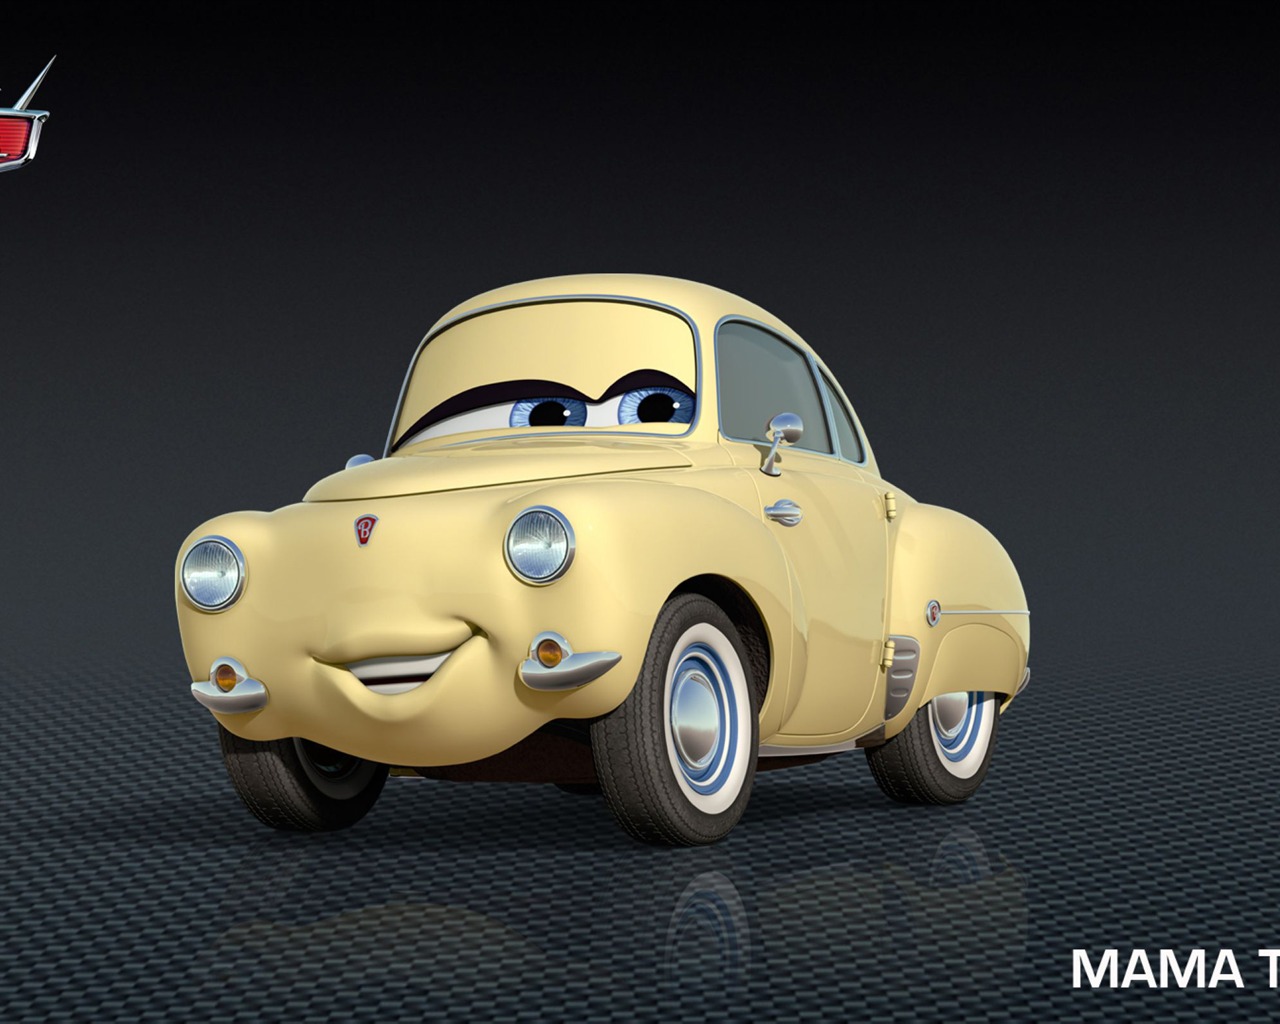 Cars 2 wallpapers #27 - 1280x1024